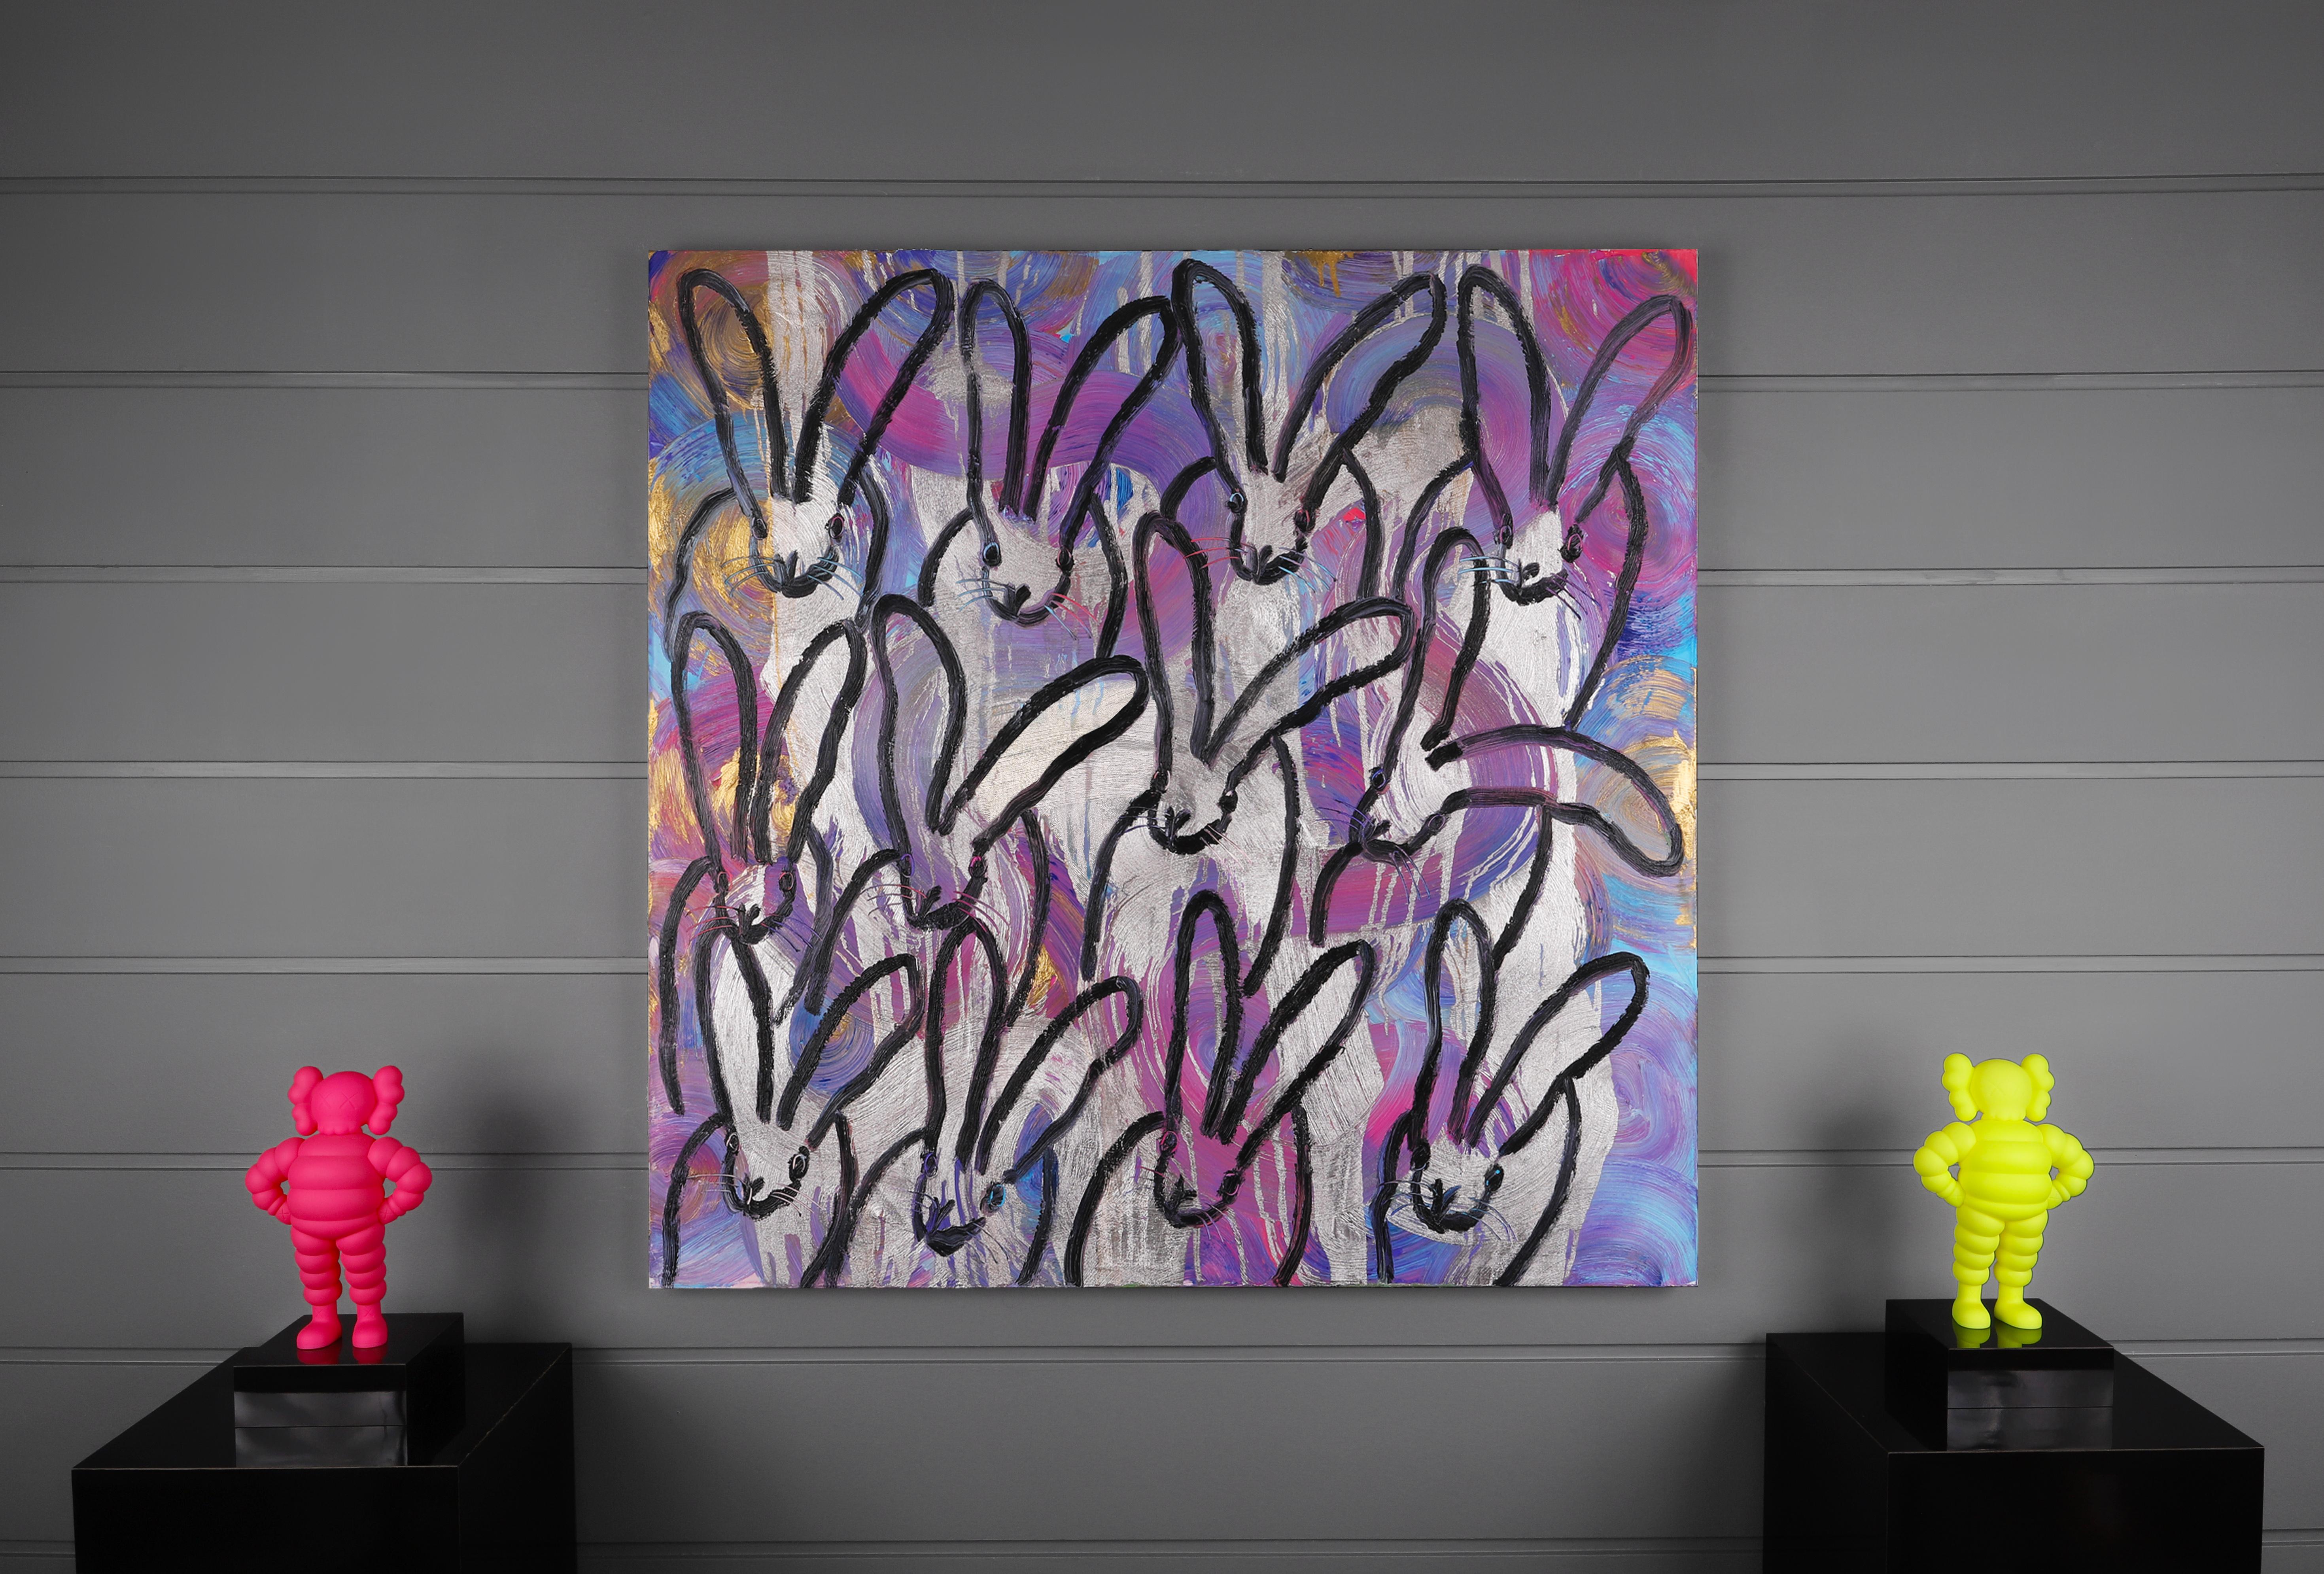 The black stacked bunnies crowd the swirling background in 'Totem on View' by Hunt Slonem. In Slonem’s signature style each bunny stands alone while simultaneously morphing together creating rhythmic repetition across the large rectangular canvas.